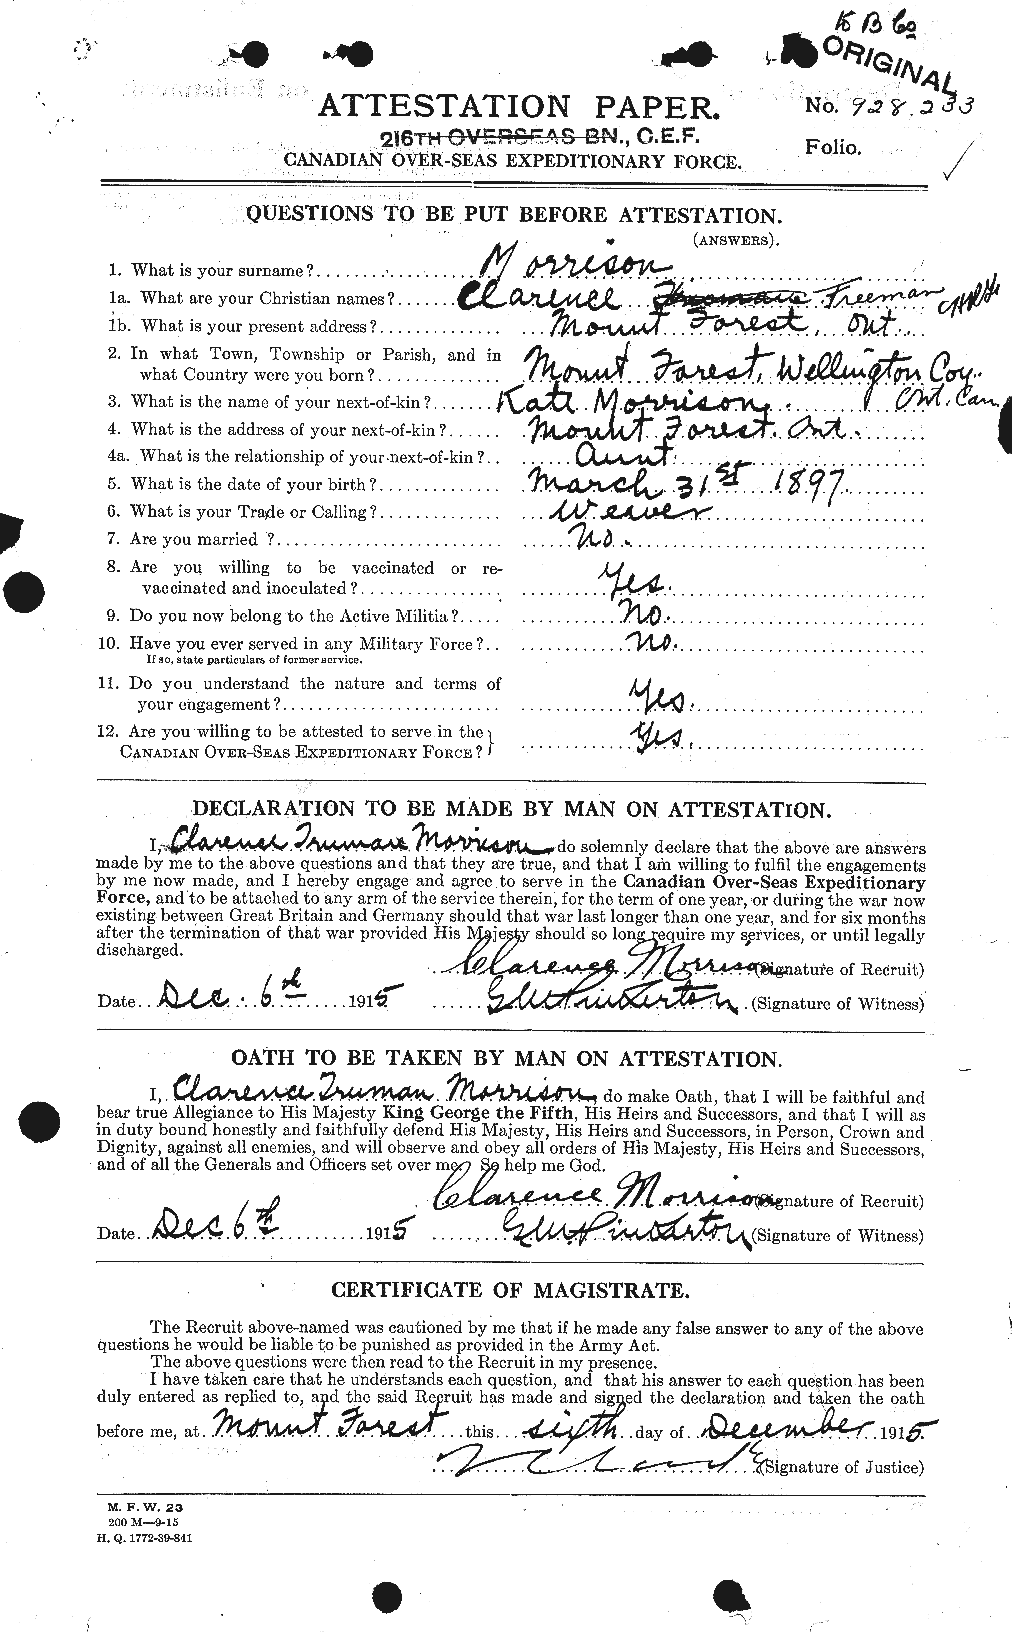 Personnel Records of the First World War - CEF 505376a